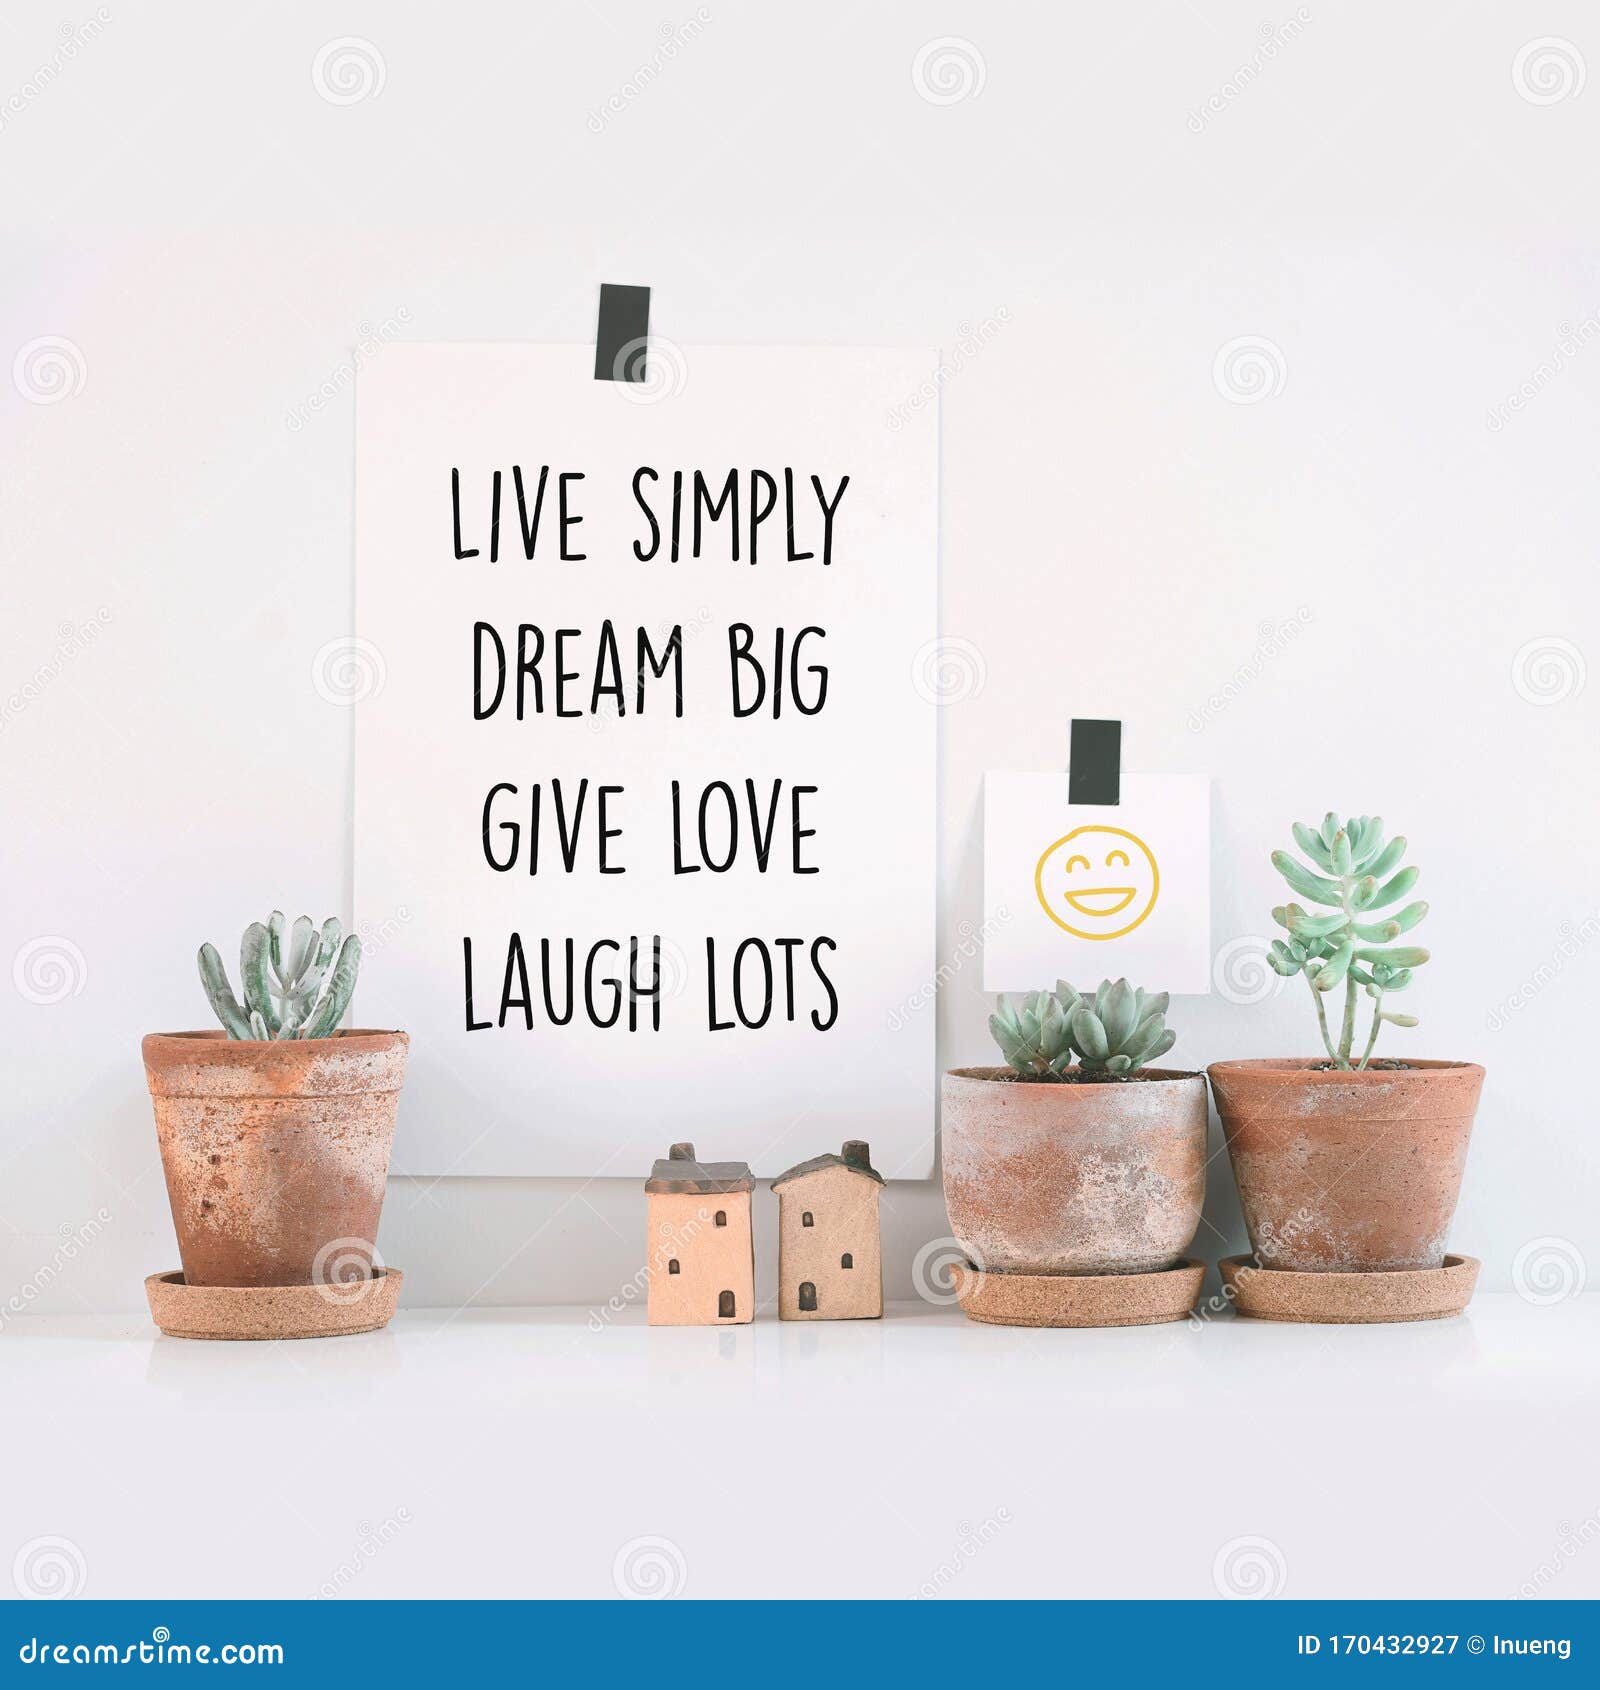 inspirational quote `live simply, dream big, give love, laugh lots`.